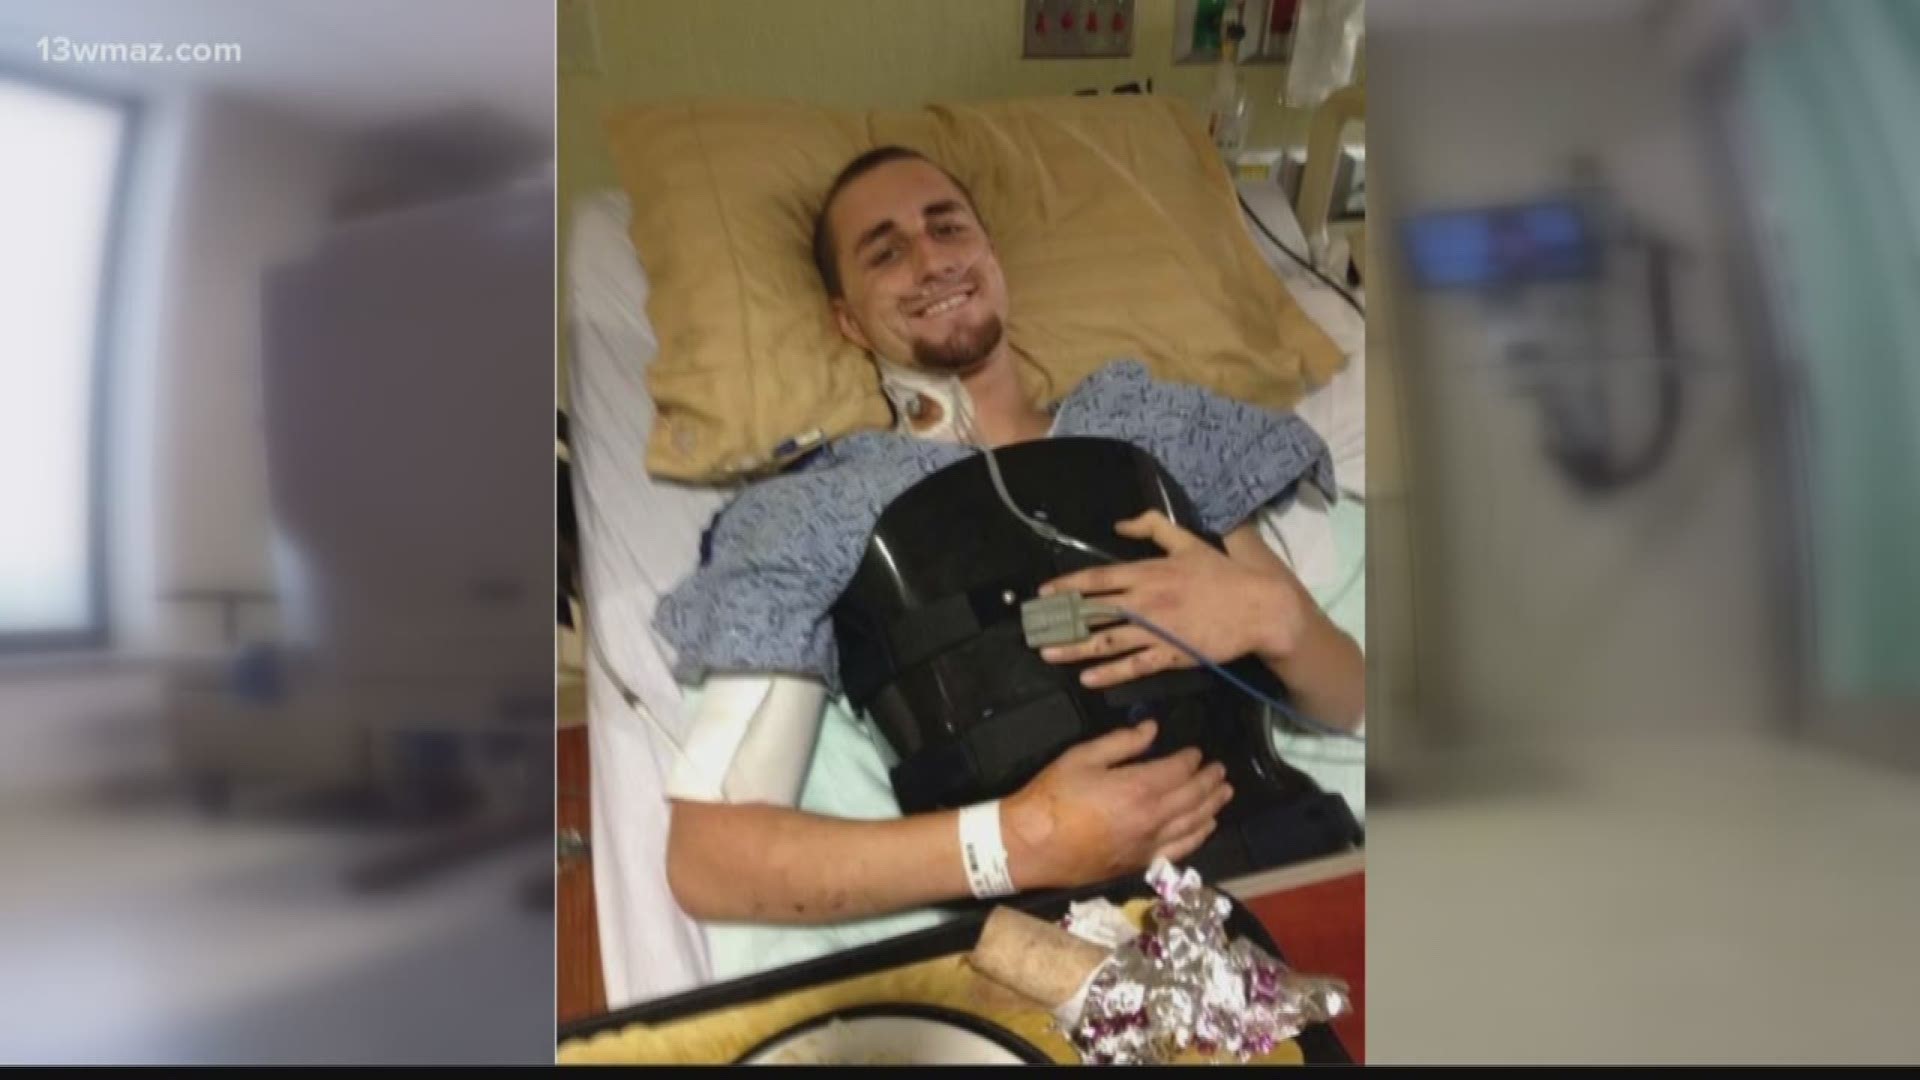 Five years ago, a serious car accident paralyzed a Dublin nurse, but now, he is back on his feet and still caring for others at Fairview Park Hospital. Ensley Nichols shows you what inspired Seth Nicholson to never give up.